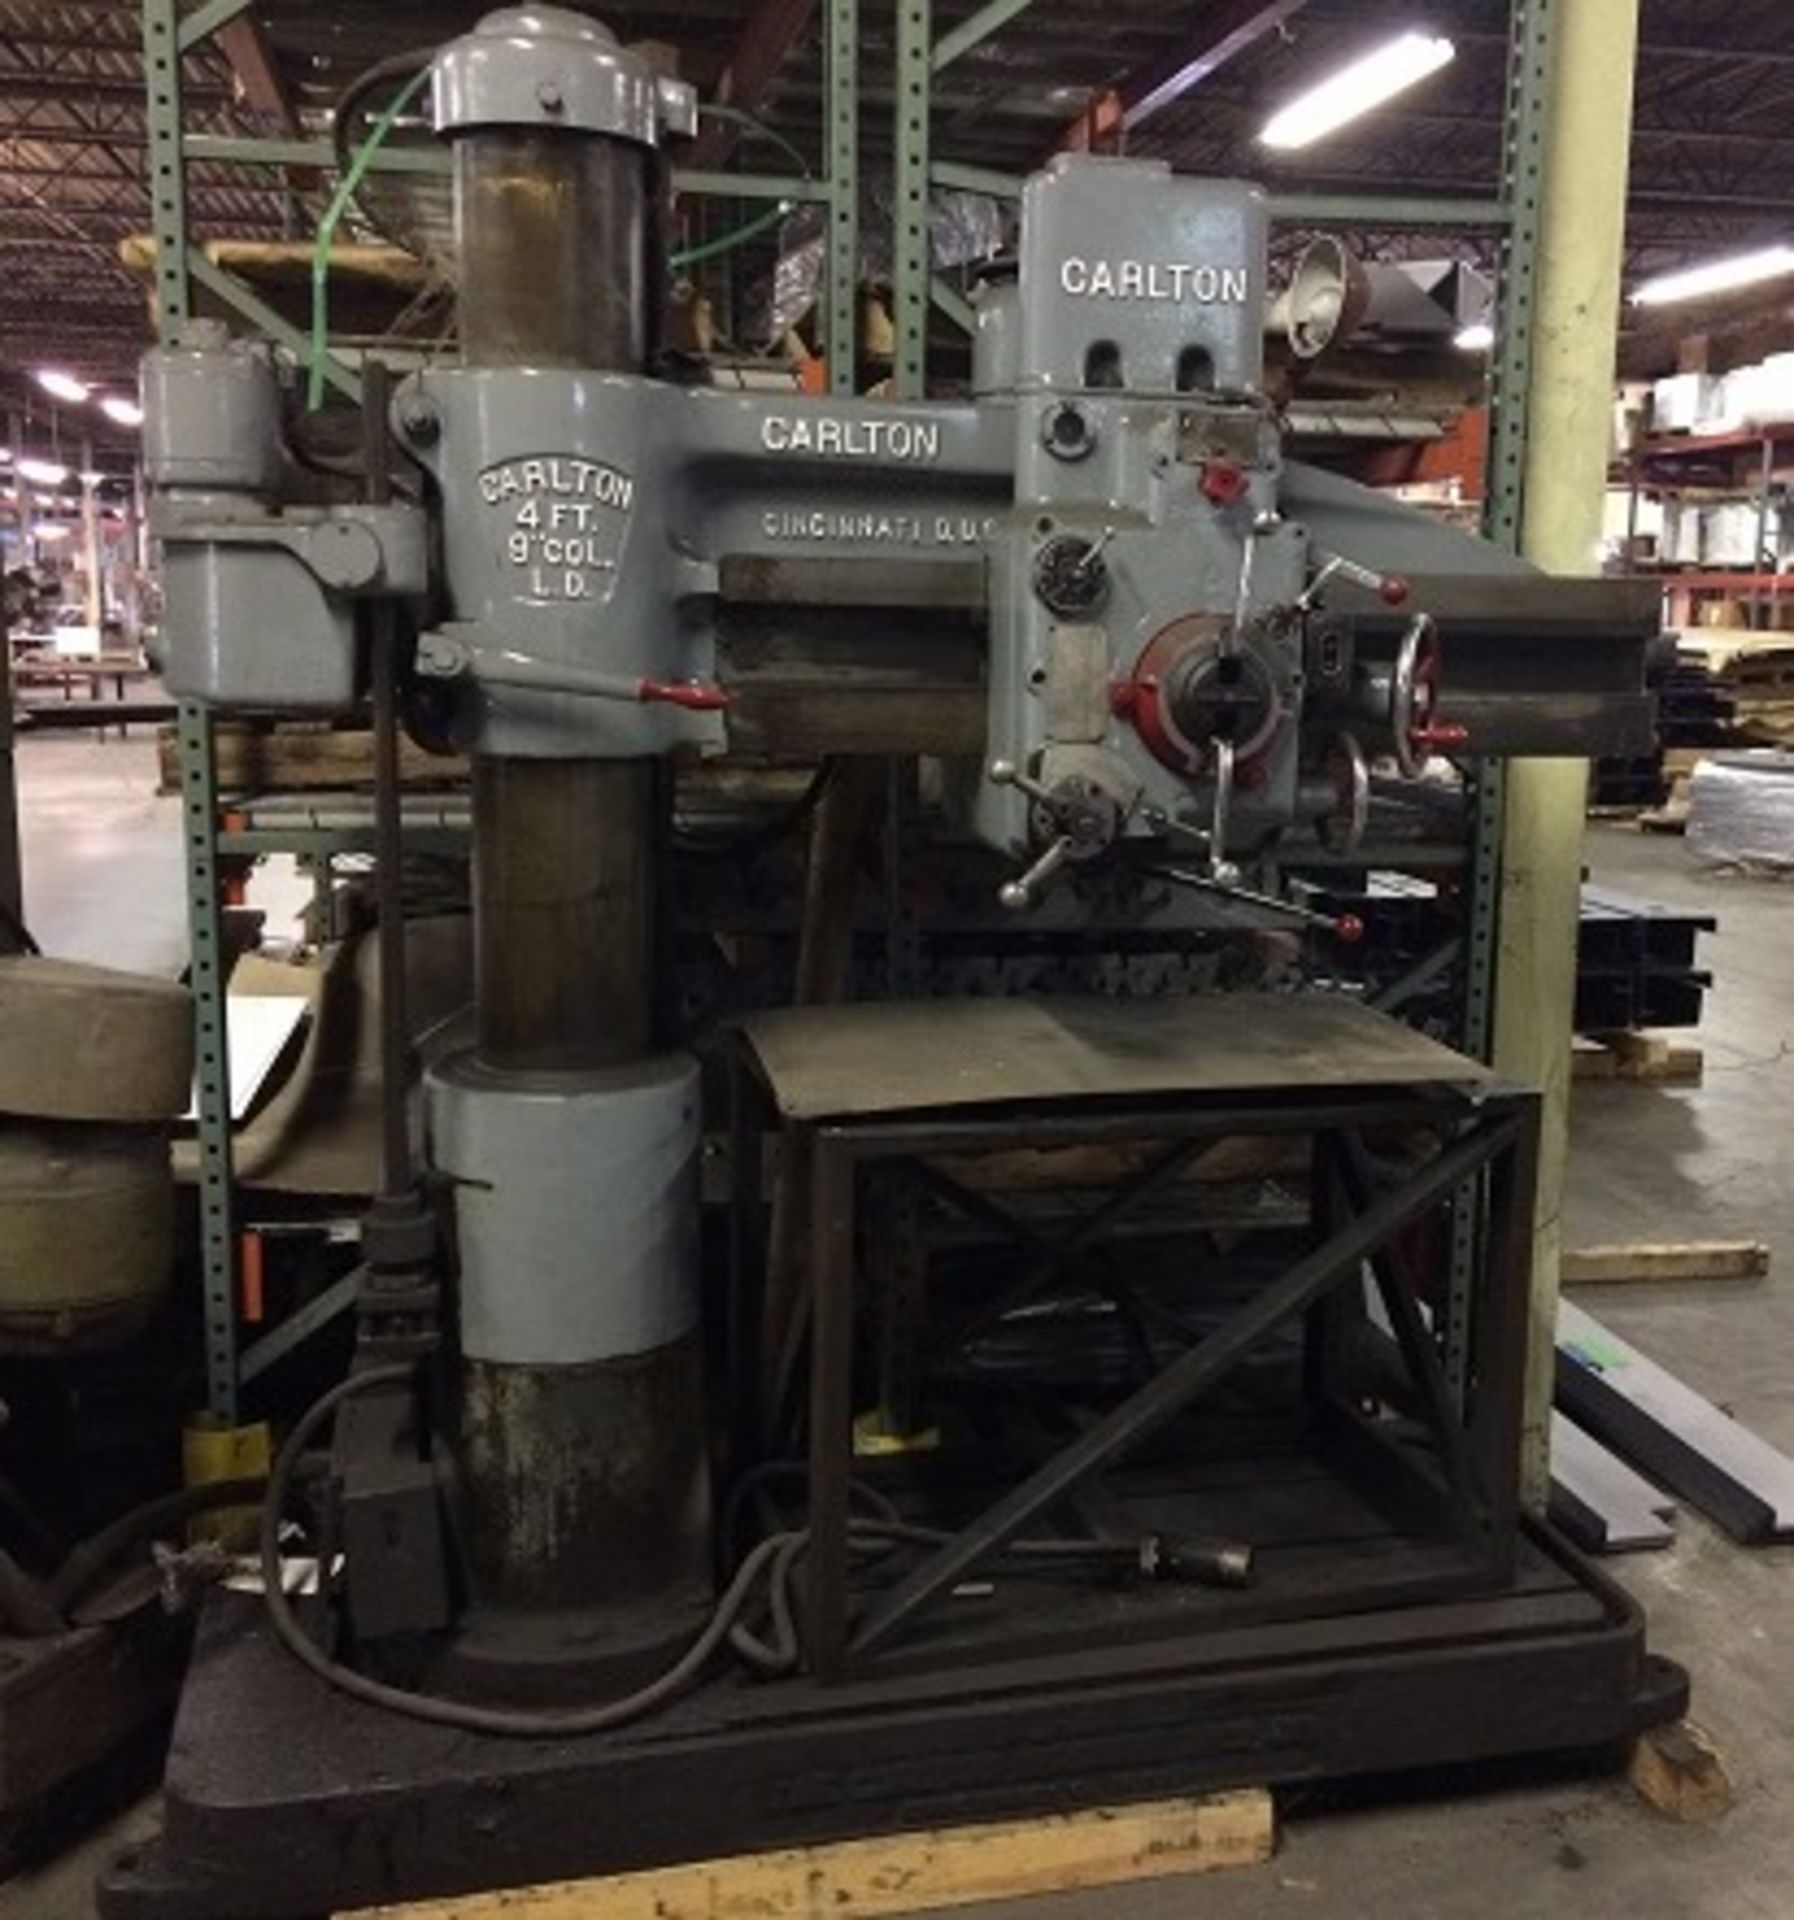 Carlton 4 Ft. X 9 In. Radial Arm Drill, No Loading Fee, Location, Florence, Kentucky - Image 2 of 3